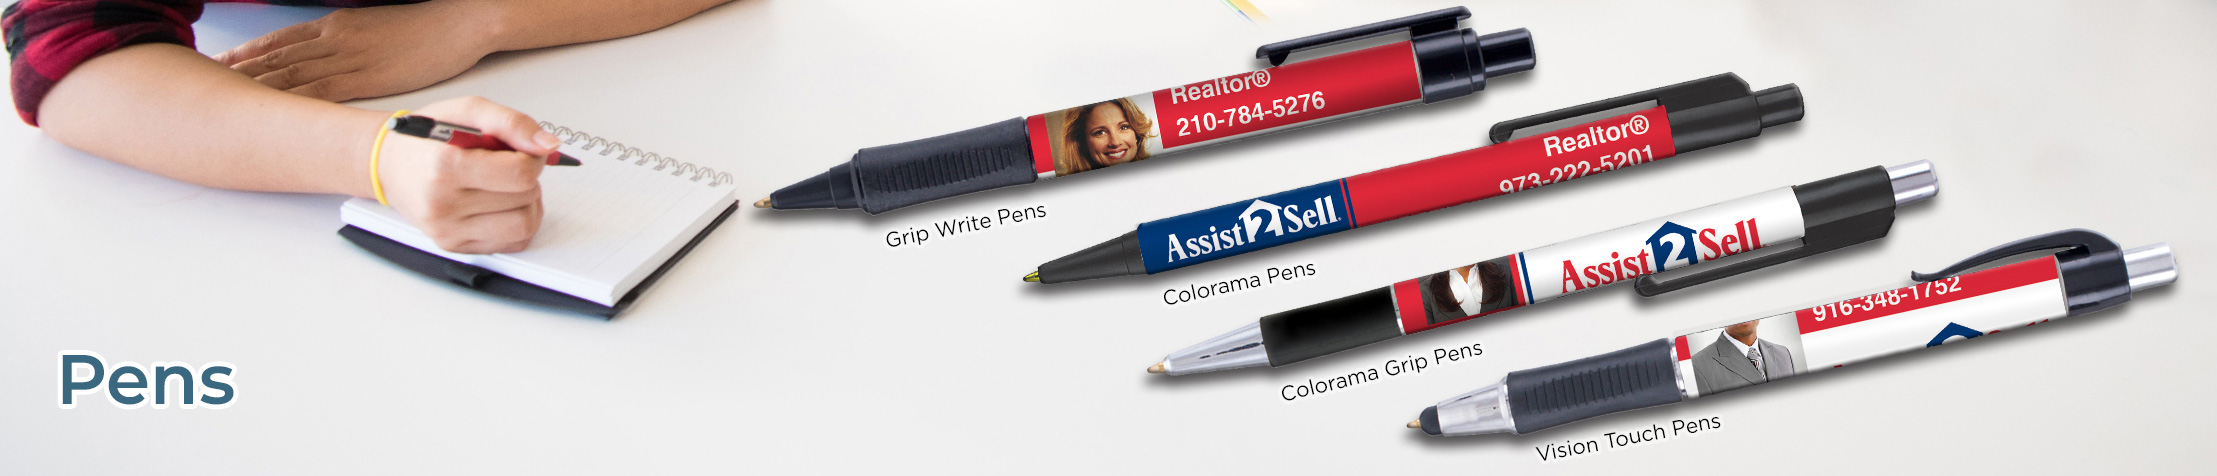 Assit2Sell Real Estate Personalized Pens - promotional products: Grip Write Pens, Colorama Pens, Vision Touch Pens, and Colorama Grip Pens | BestPrintBuy.com